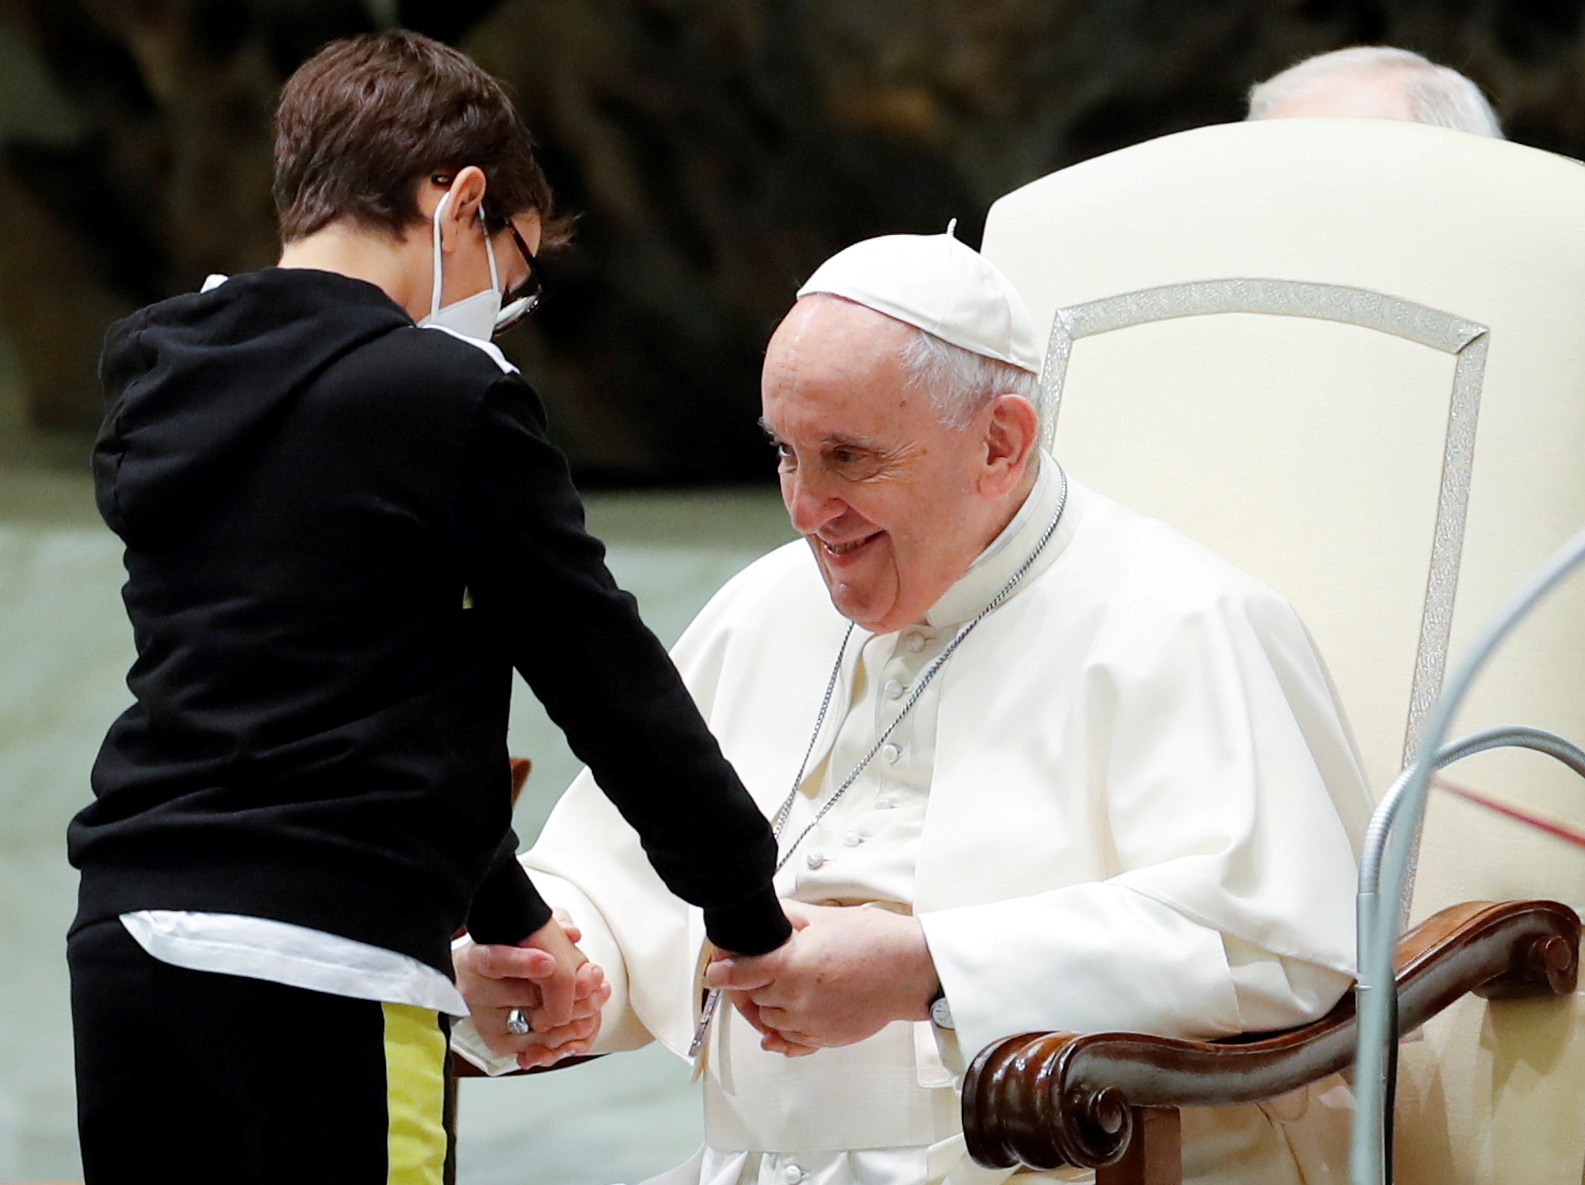 A boy greets Pope Francis during the weekly general audience at the Vatican, October 20, 2021. REUTERS/Remo Casilli